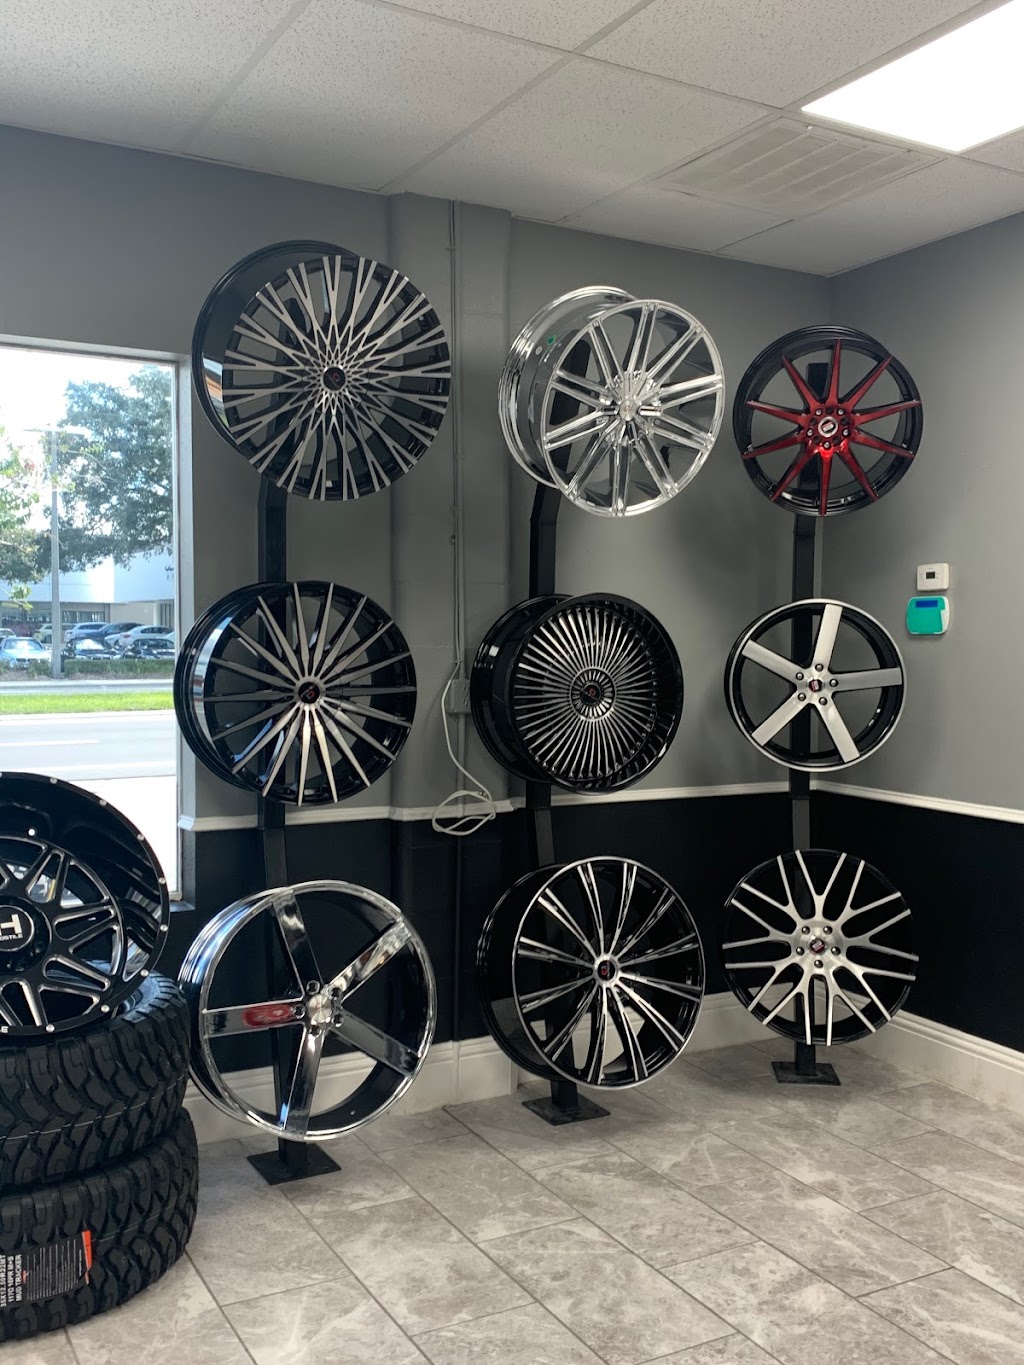 Wheel Identity Tires and Accessories | 11626 N Florida Ave, Tampa, FL 33612 | Phone: (813) 863-9449